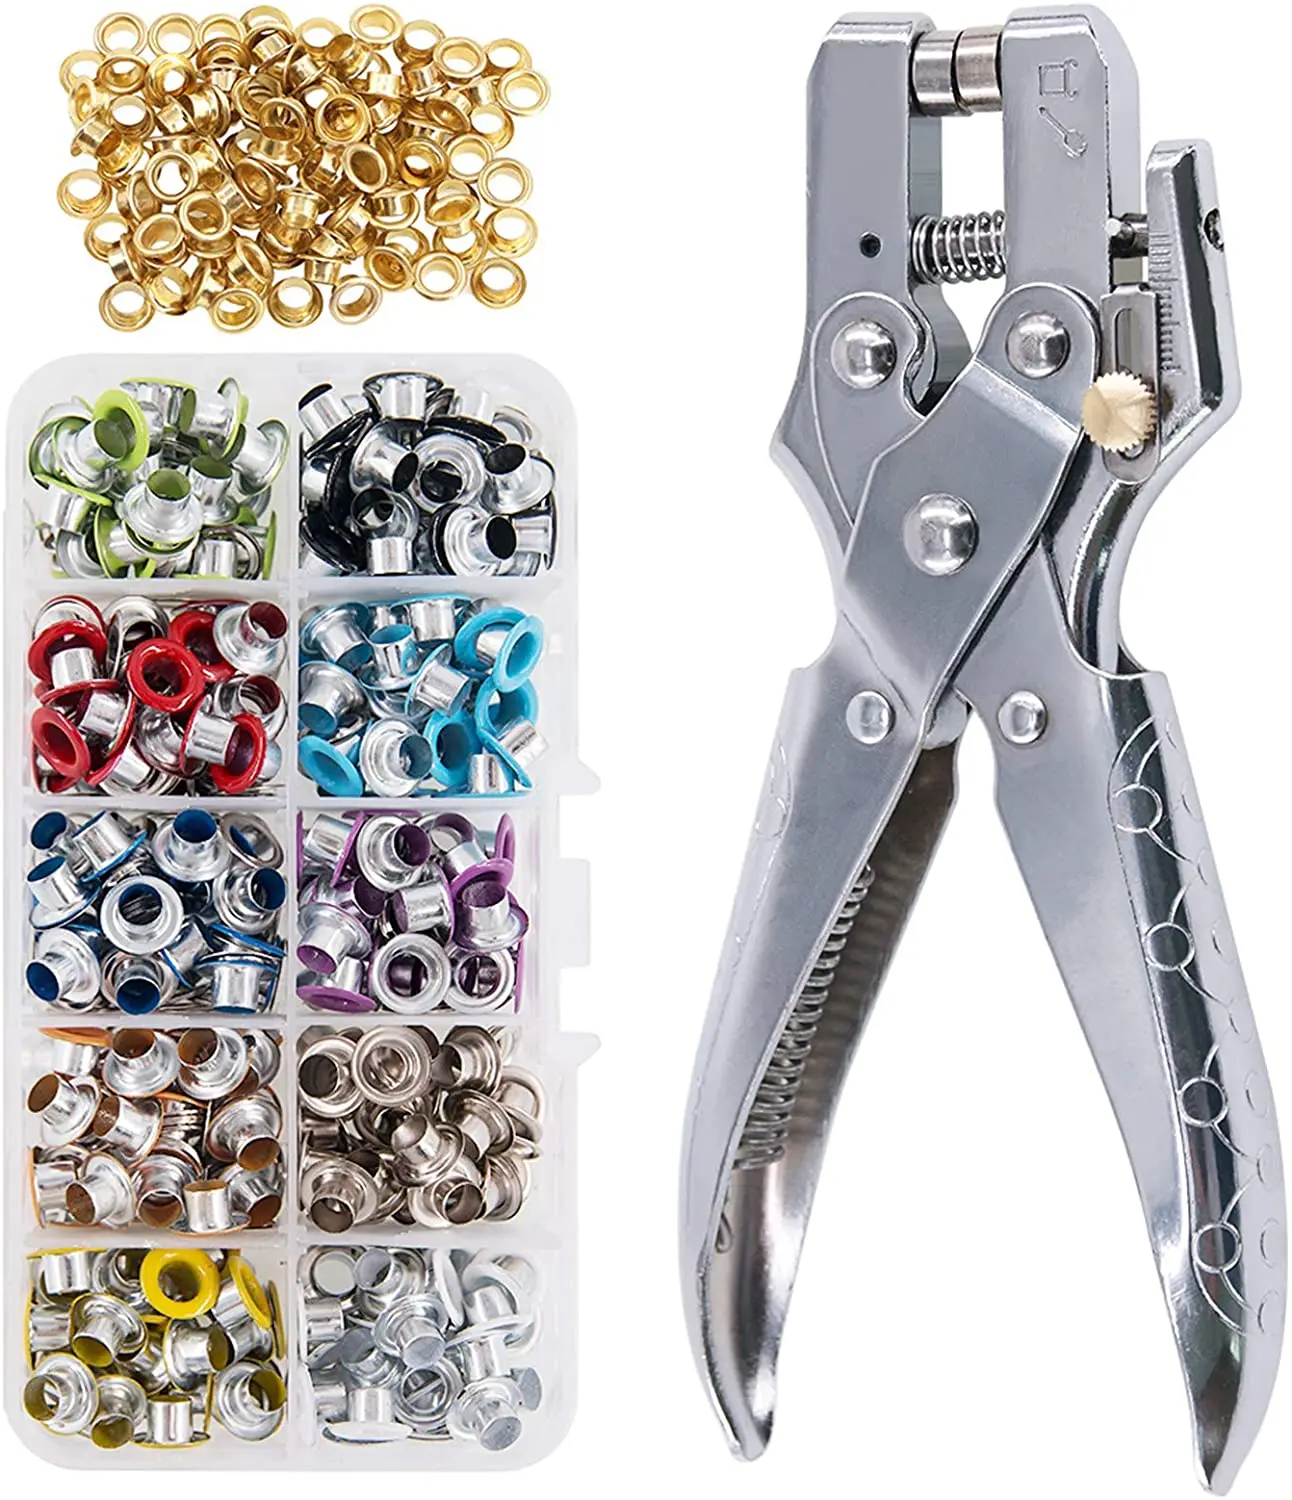 300/540 Sets 5mm Multi-Color Metal Eyelets Grommets Kit with Installation tools, for Leather, Canvas, Shoes, Belts, Bags, Crafts